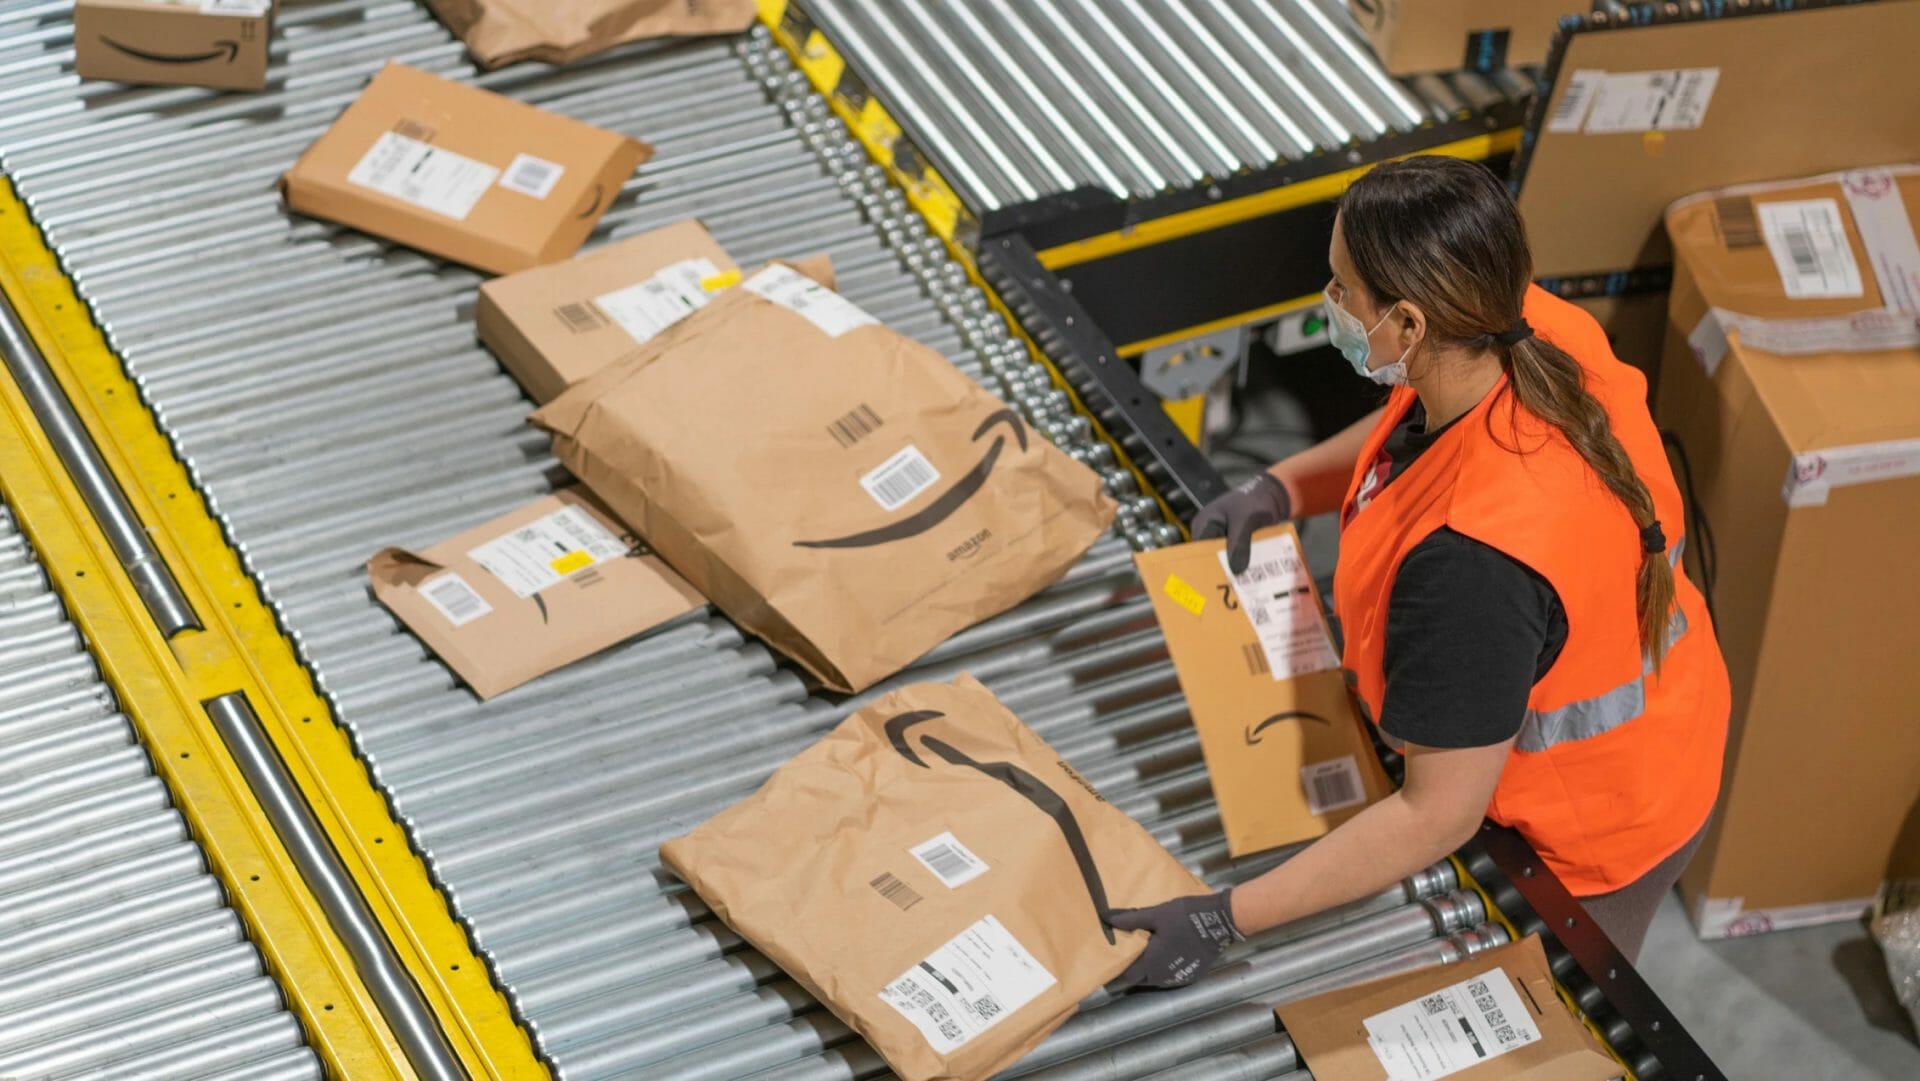 Amazon,machine learning,recyclability,sustainability report,packaging waste,single-use plastic,eco-friendly deliveries,green innovation,curbside-recyclable alternatives,sustainable packaging,2022 progress,environmental initiatives,circular economy